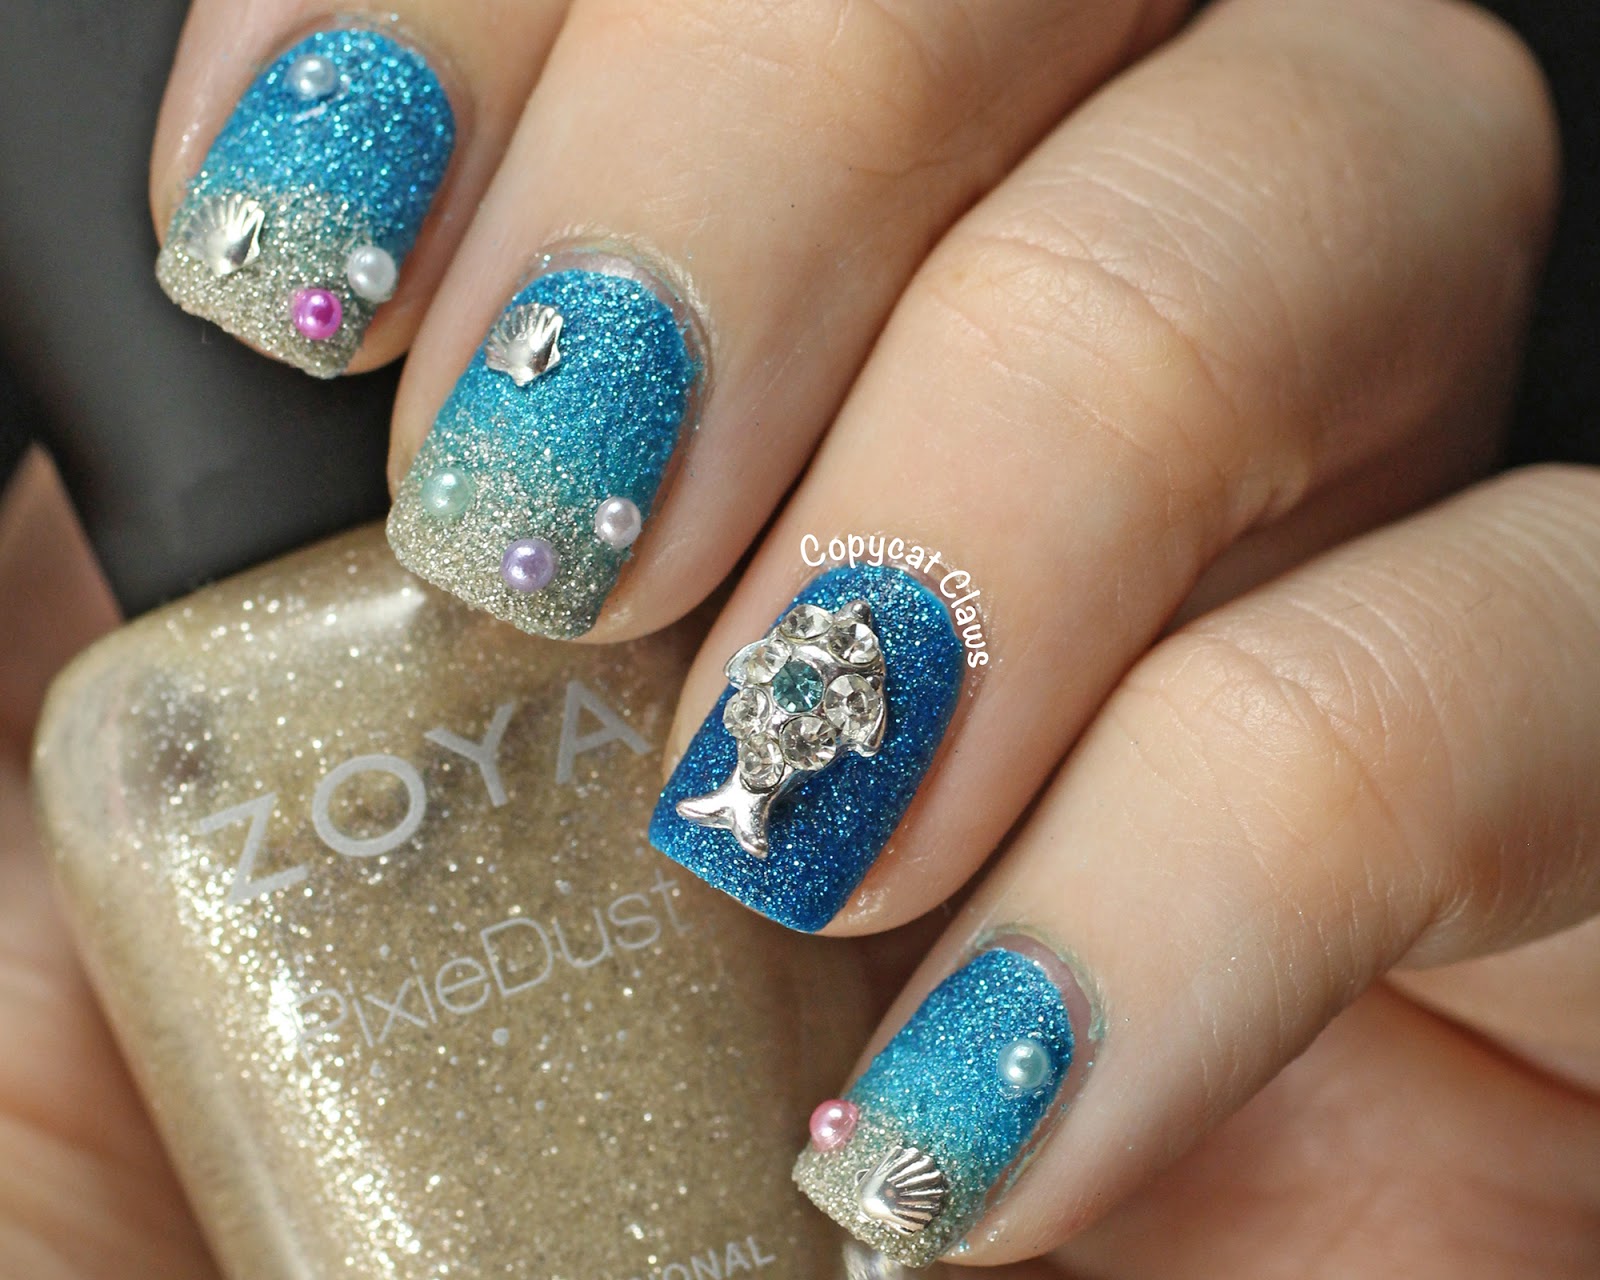 1. Beachy Ombre Nails - wide 1